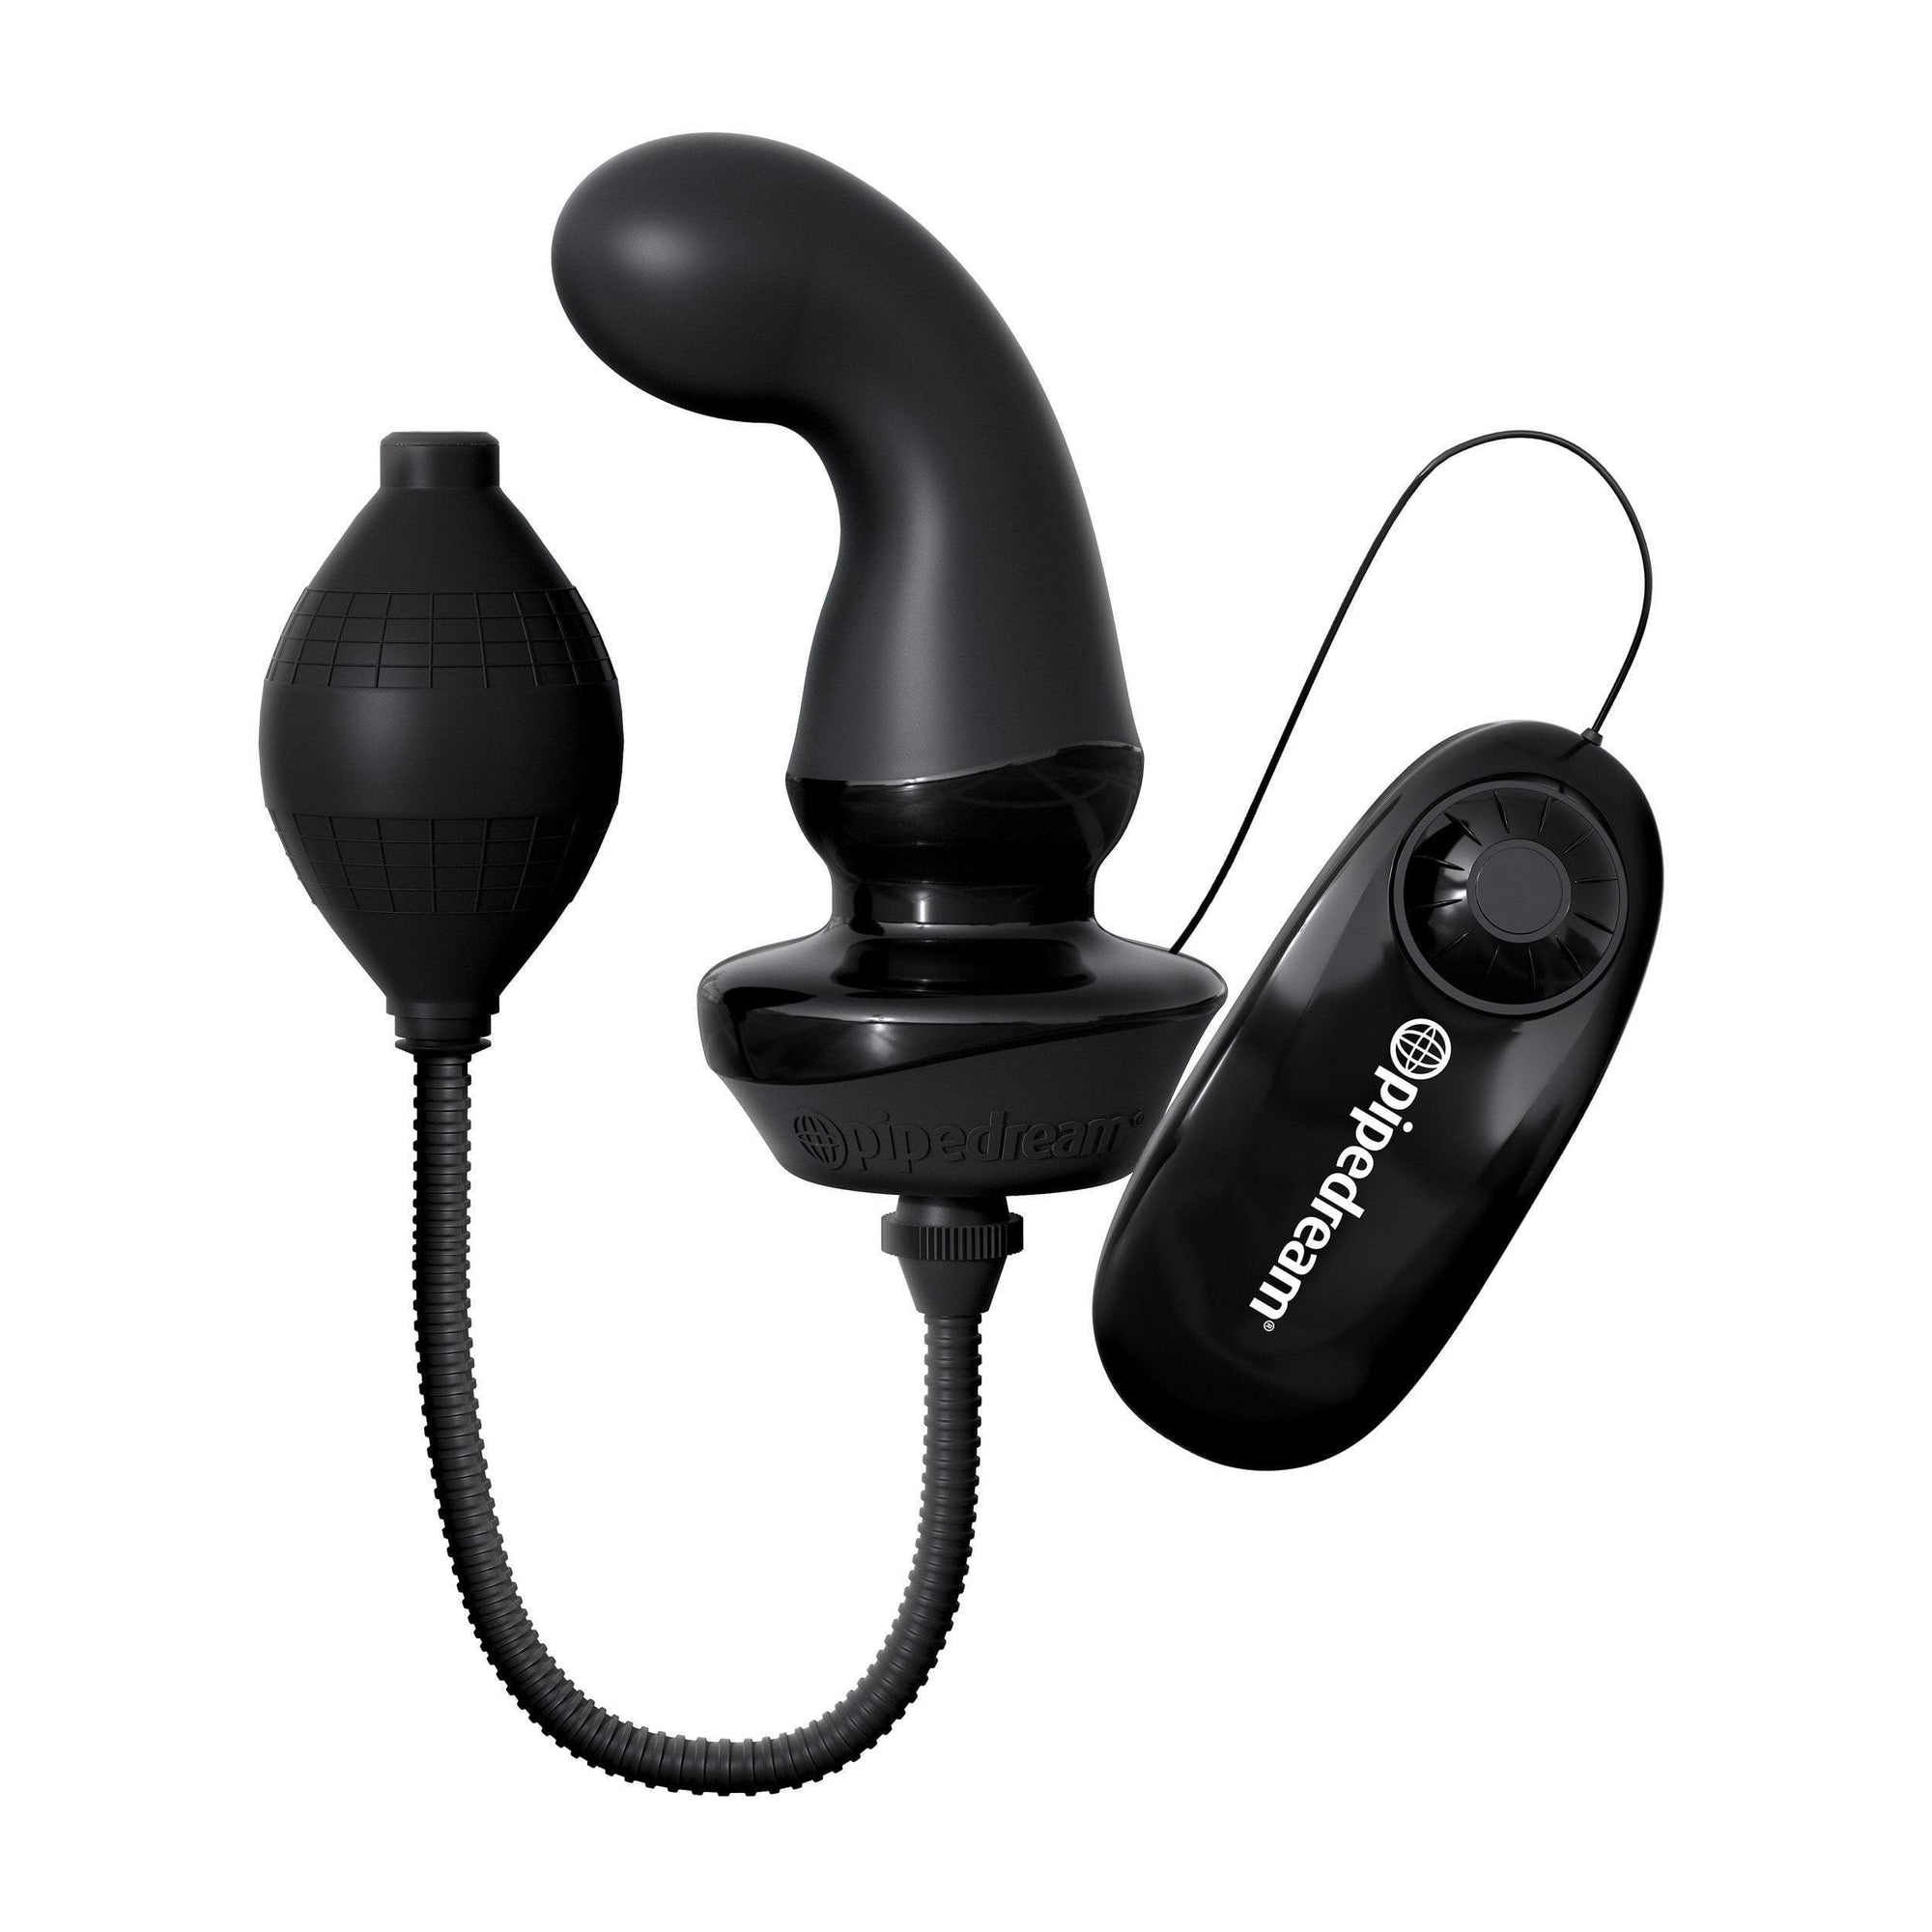 Pipedream - Anal Fantasy Elite Collection Inflatable P-Spot Massager (Black) Expandable Anal Plug (Non Vibration)